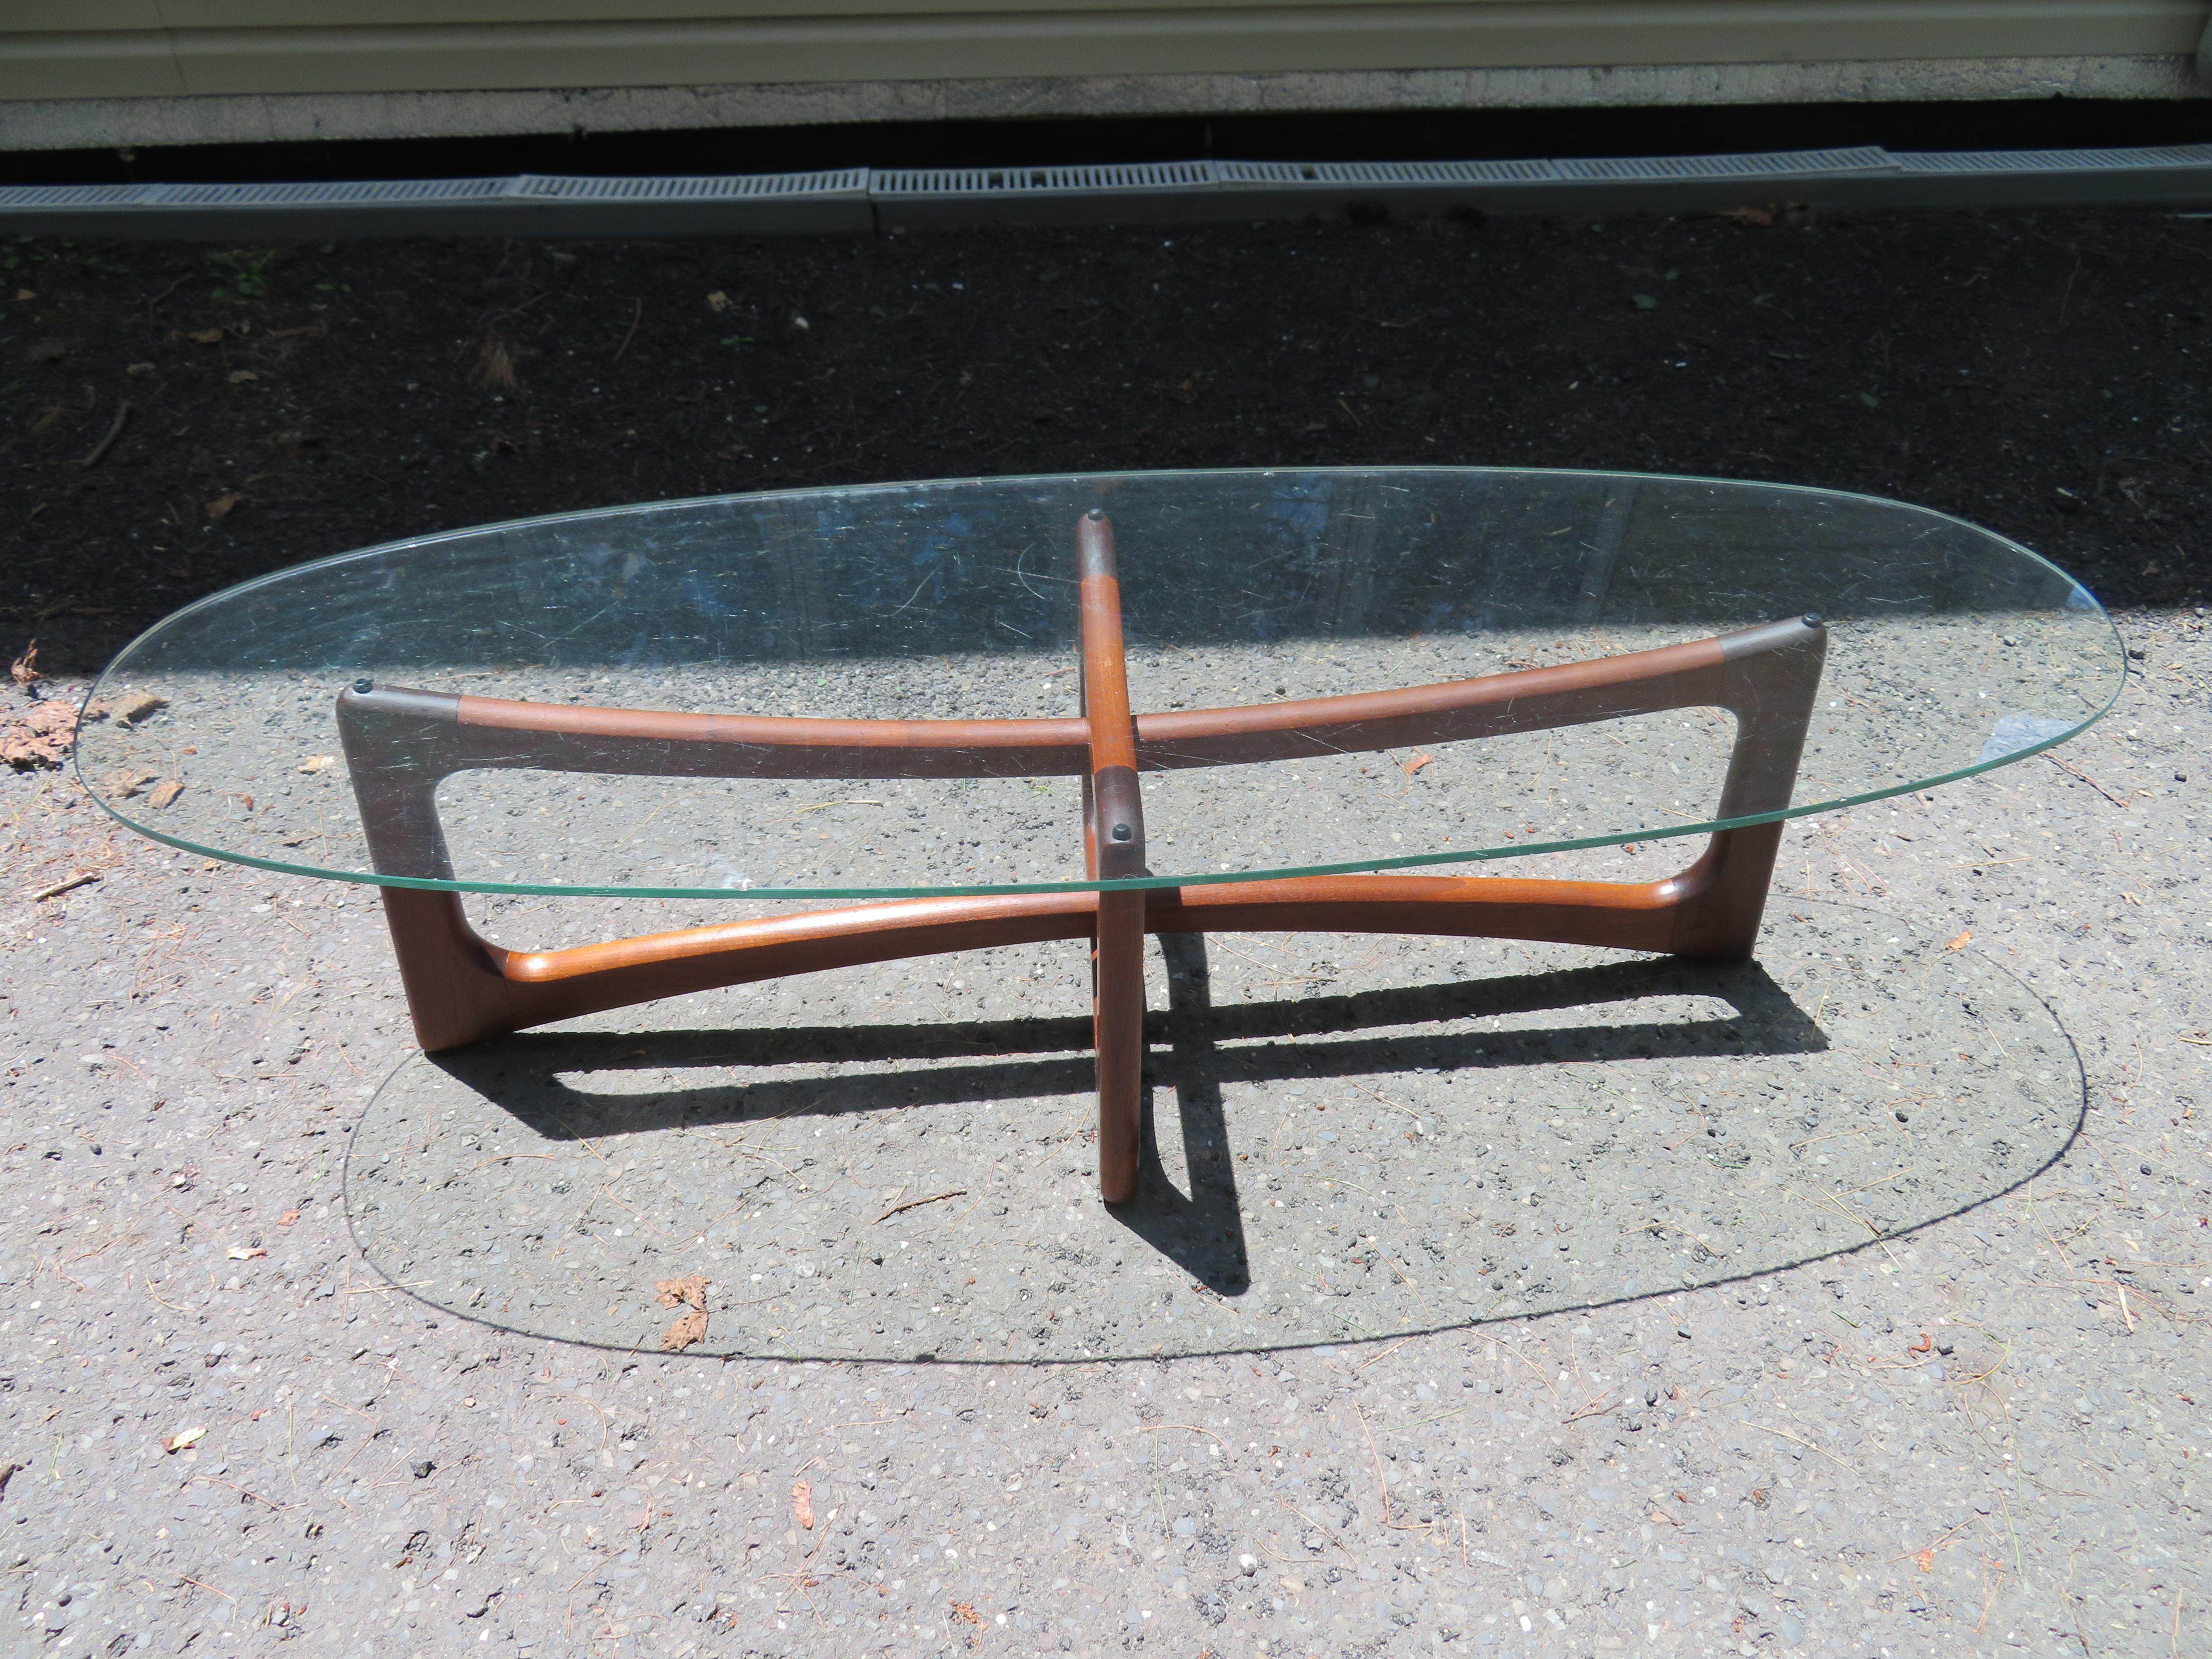 Wonderful Adrian Pearsall sculptural walnut dog bone coffee table. The walnut base retains its original rubbed oil finish and still looks great-new rubber bumpers. The original glass has some chips so we will have a new piece cut.